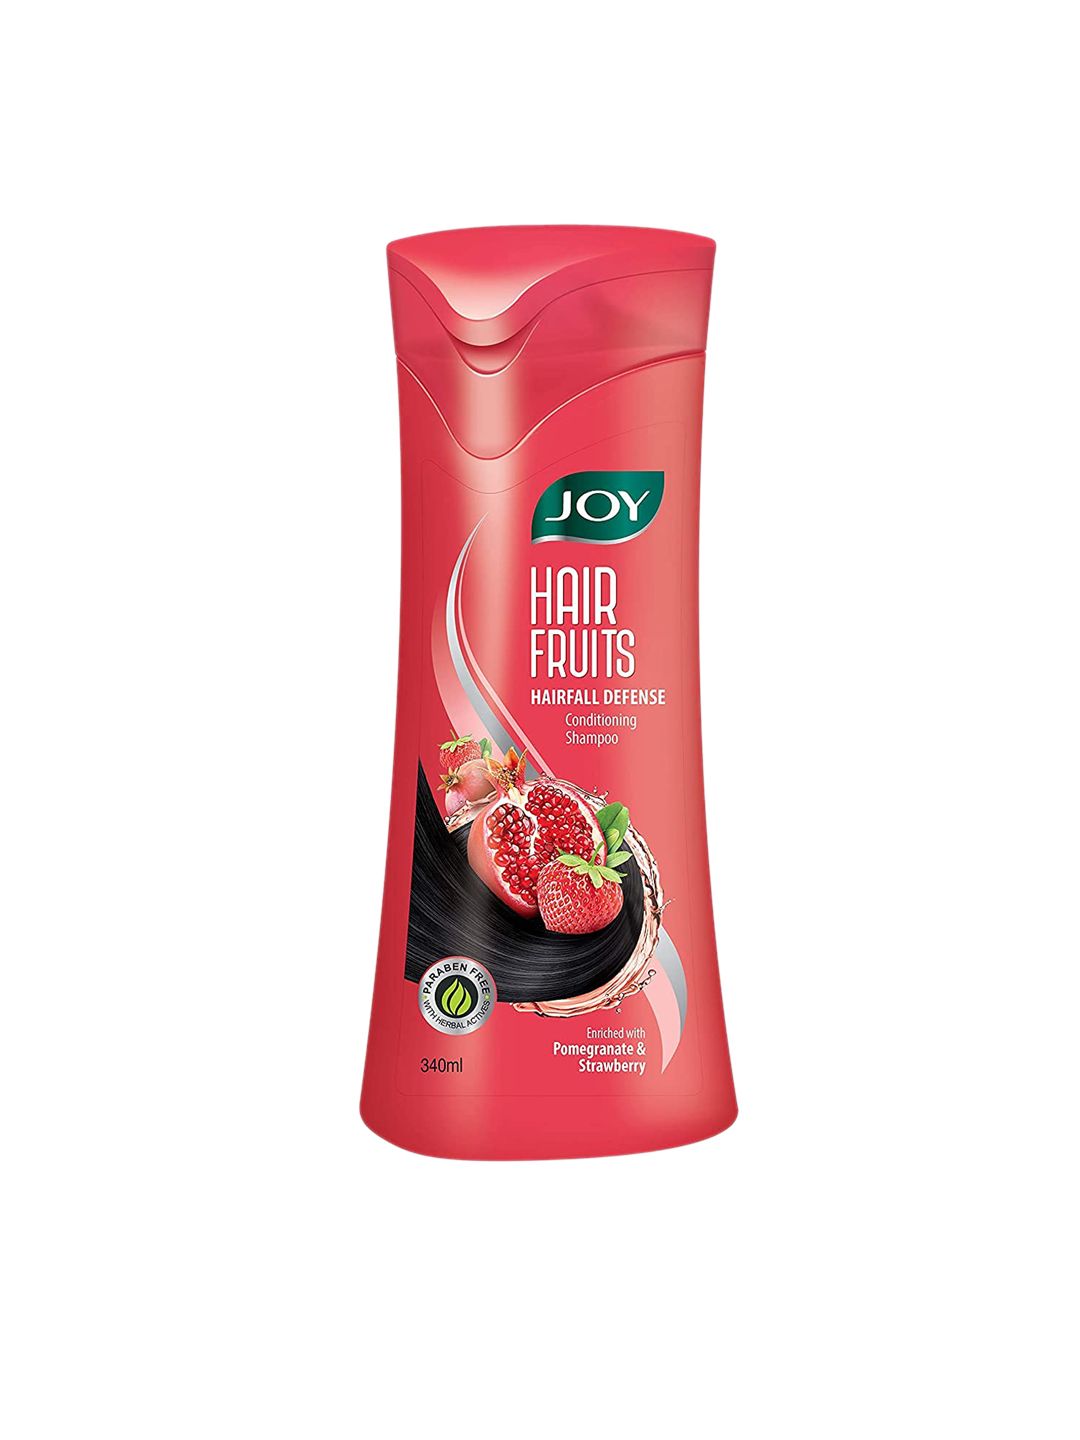 JOY Hair Fruits Hairfall Defense Conditioning Shampoo with Pomegranate & Strawberry- 340ml Price in India